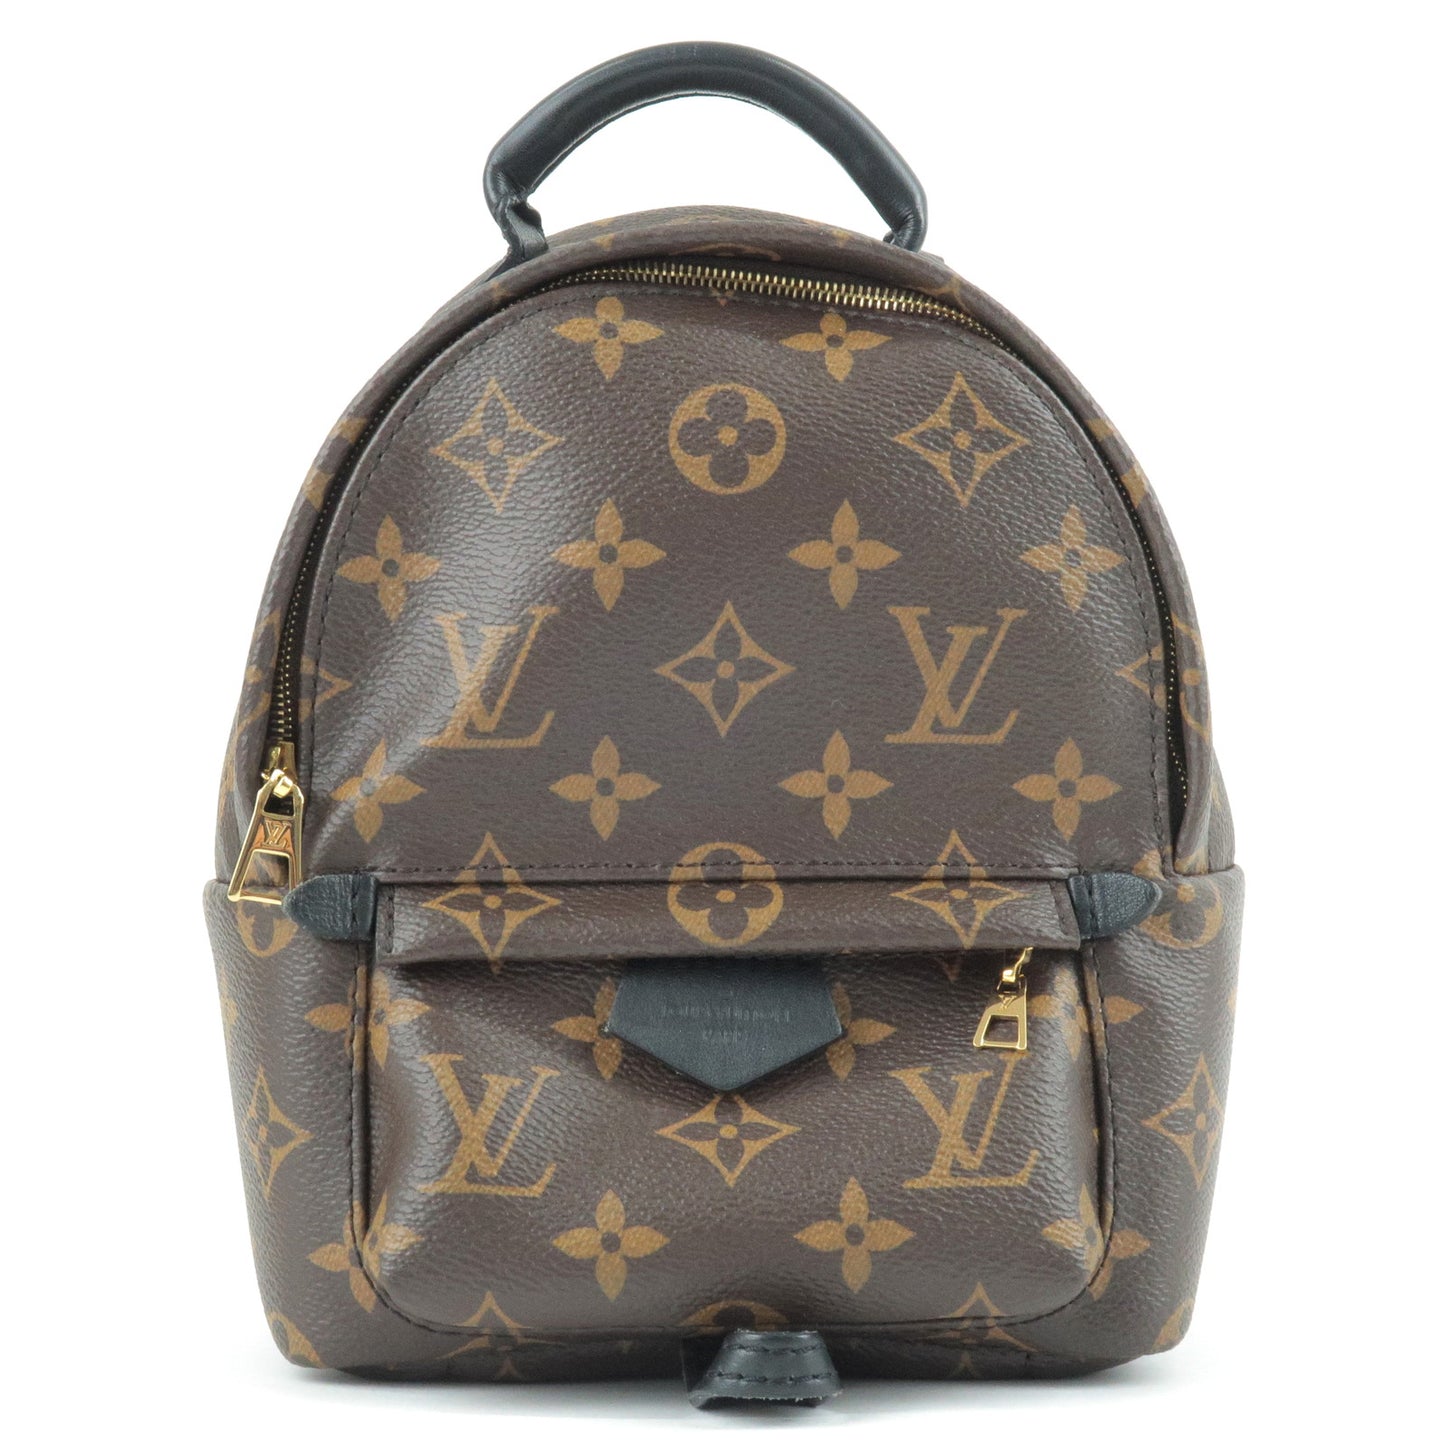 LOUIS VUITTON Monogram Palm Springs Backpack MINI M44873 from Japan